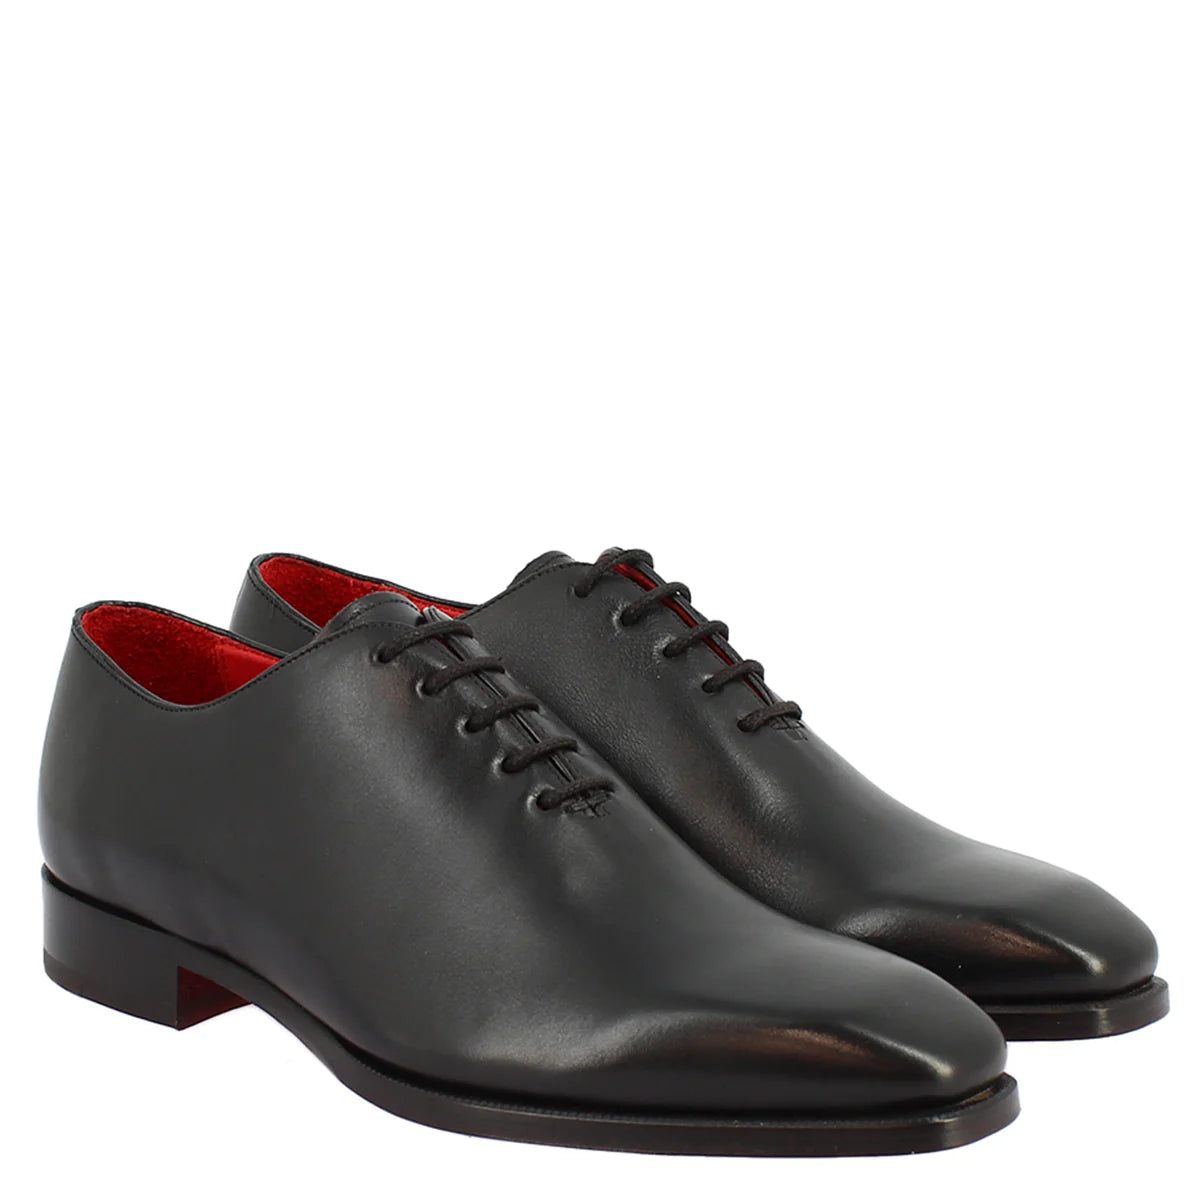 Handmade lace-up shoes in black leather